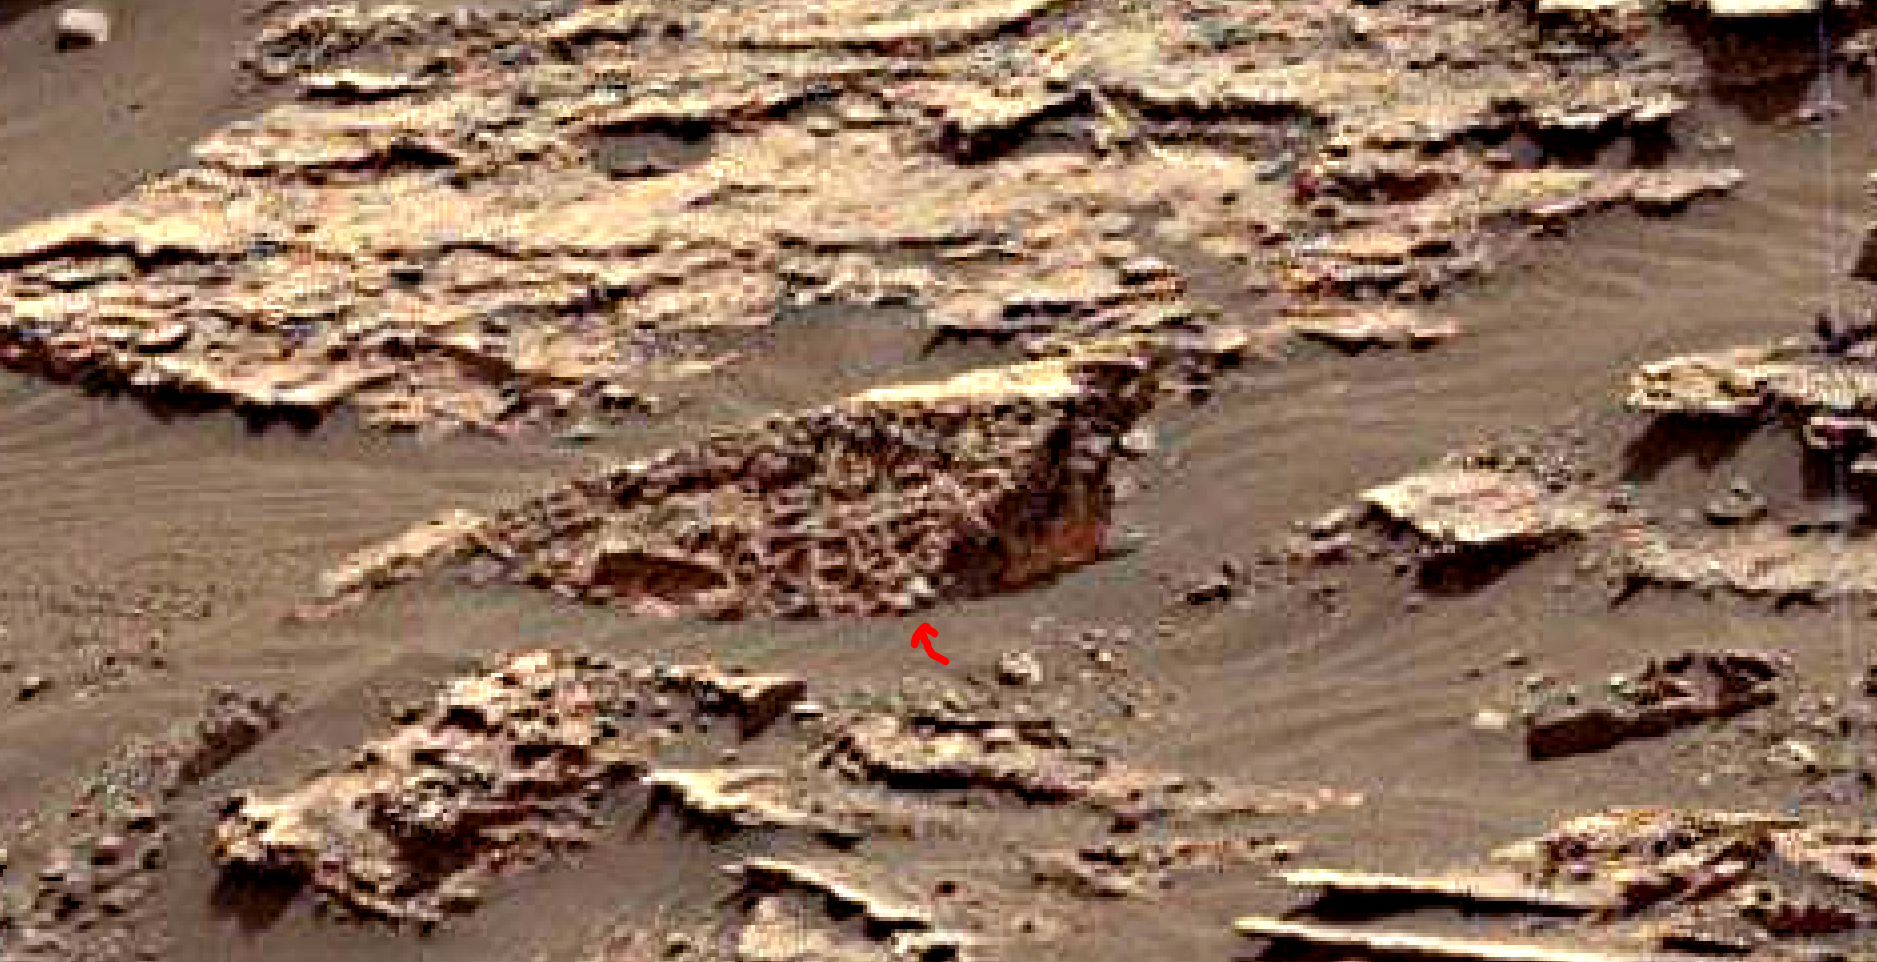 mars-sol-1485-anomaly-artifacts-12-was-life-on-mars